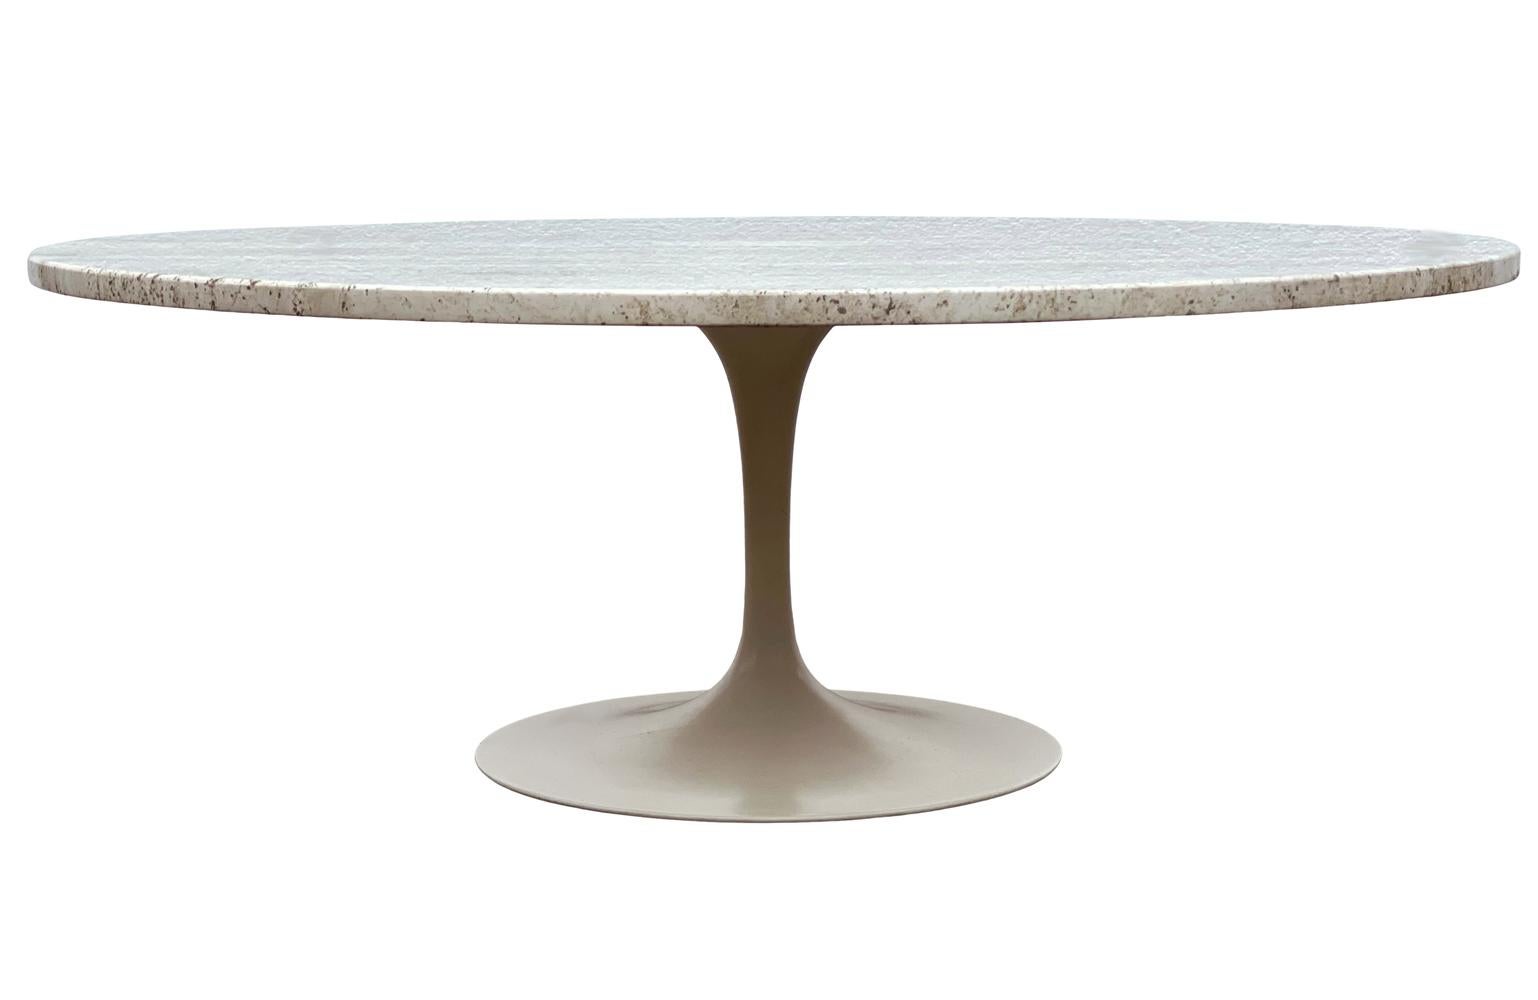 A custom circular coffee table designed by Eero Saarinen and produced by Knoll circa 1960's. The table features an off white powder coated pedestal base with a custom Italian travertine base. Manufacture label.